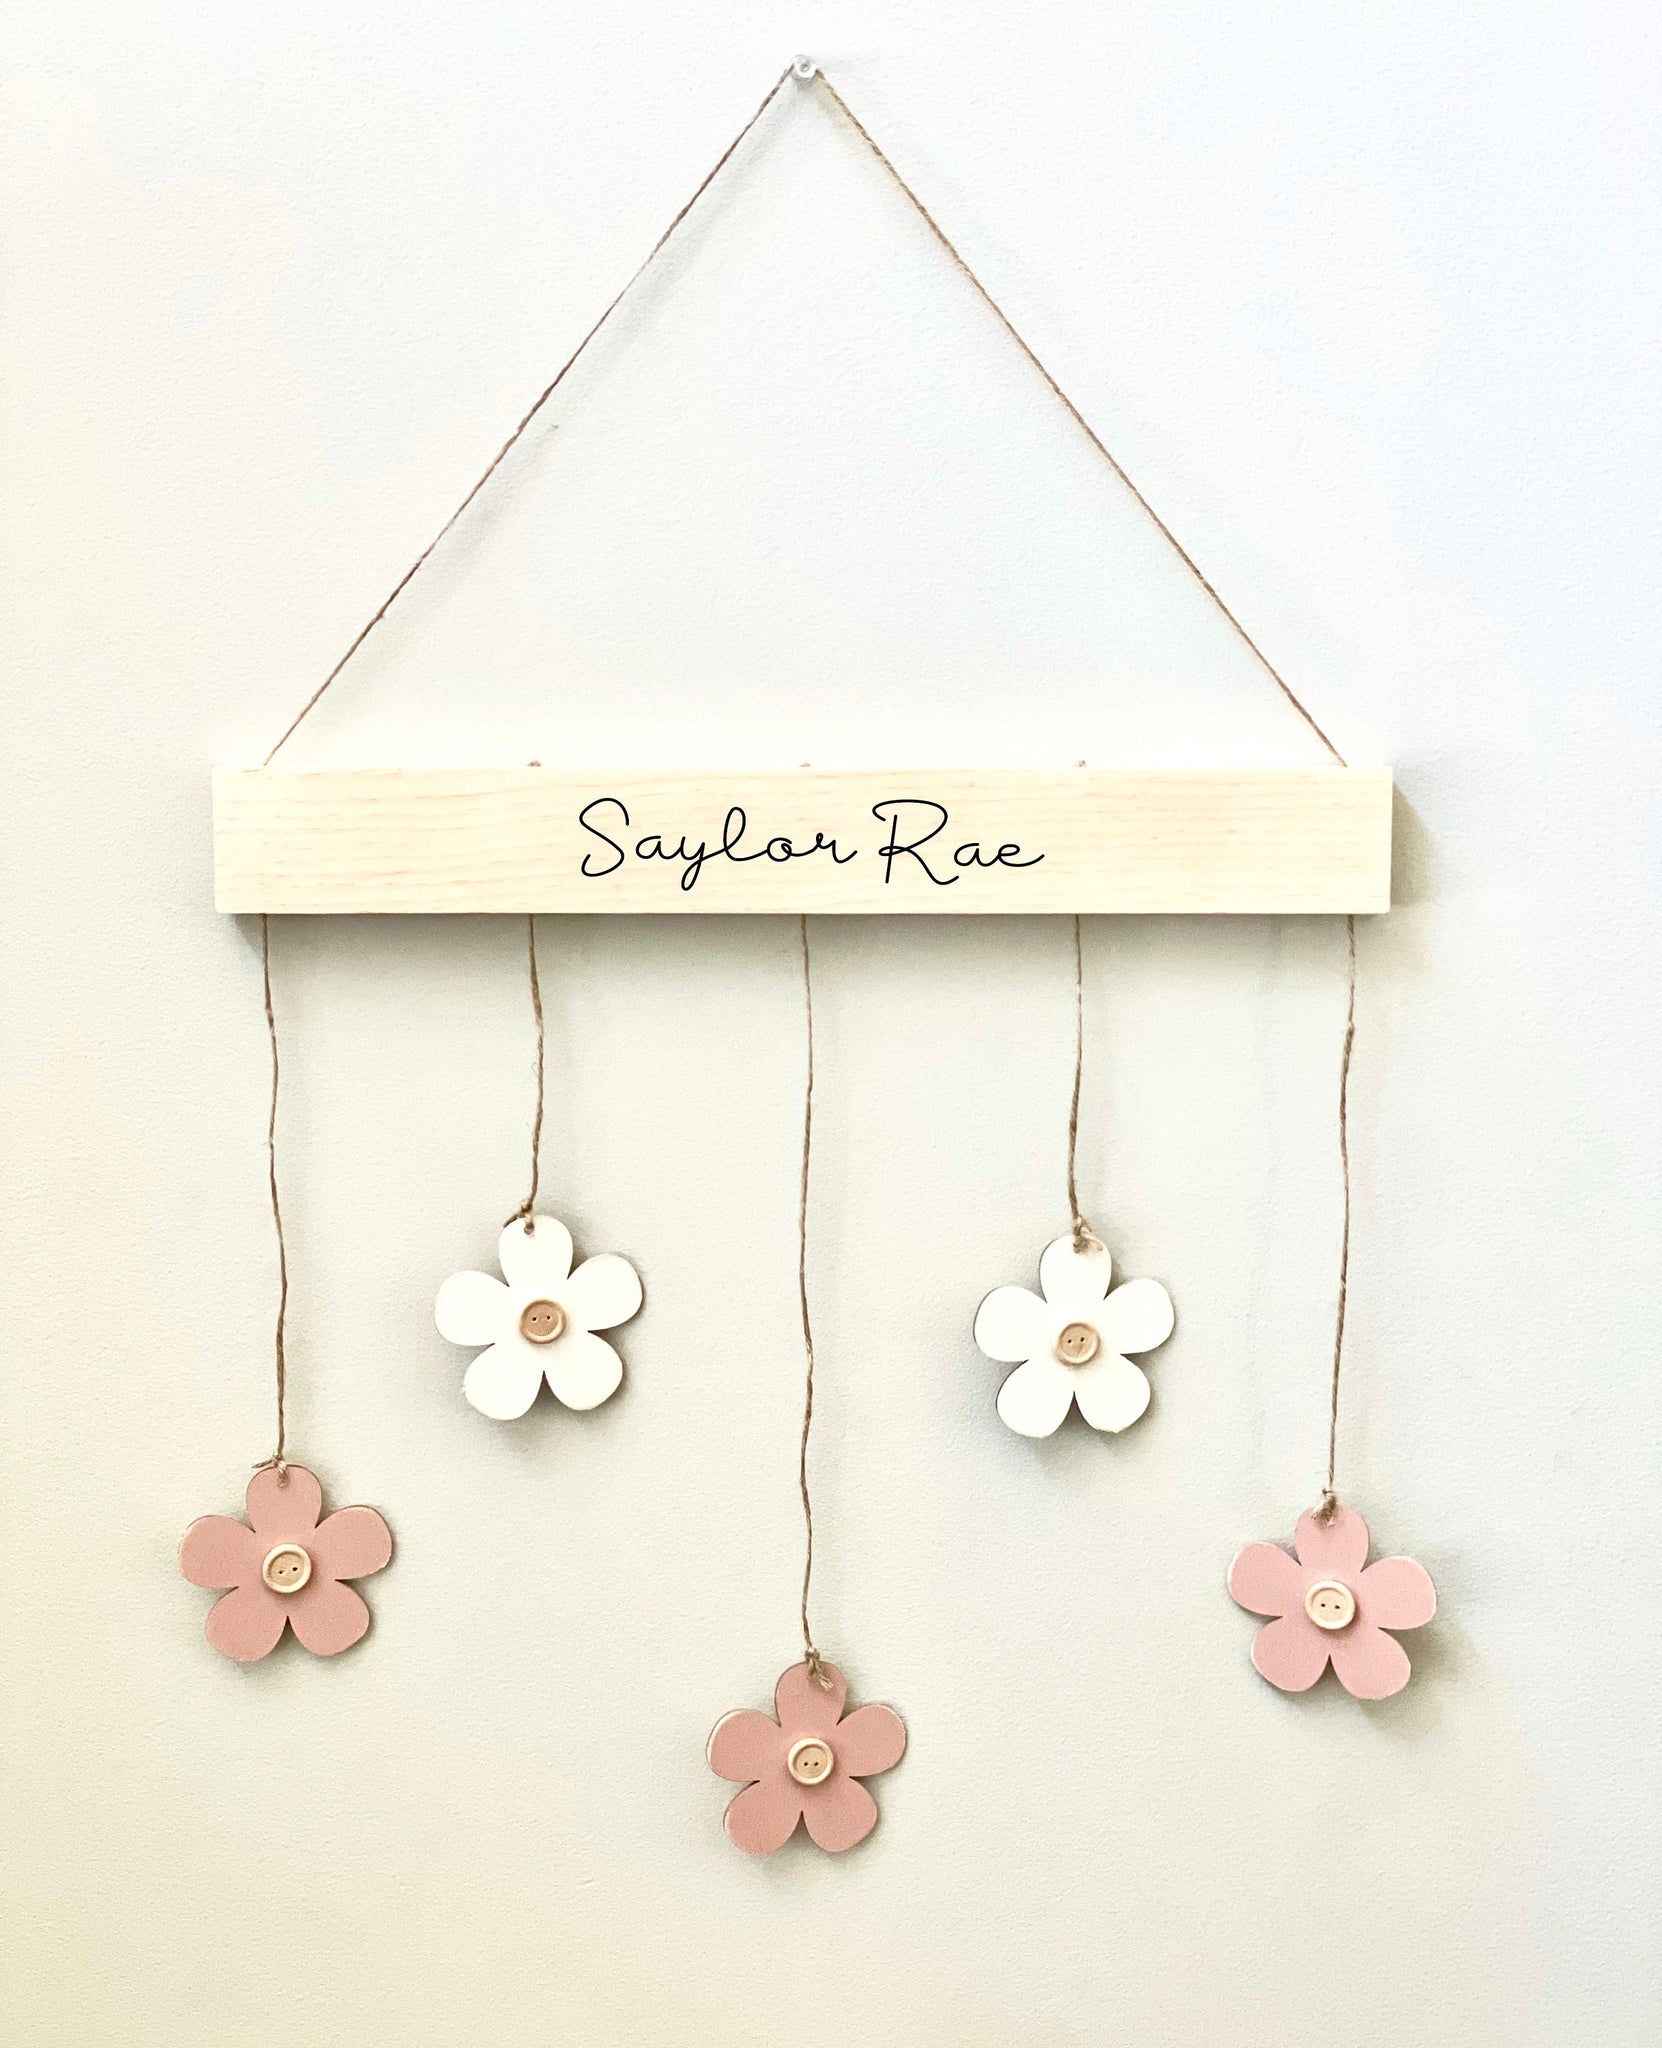 Personalized daisy wall hanging, Wooden nursery flowers